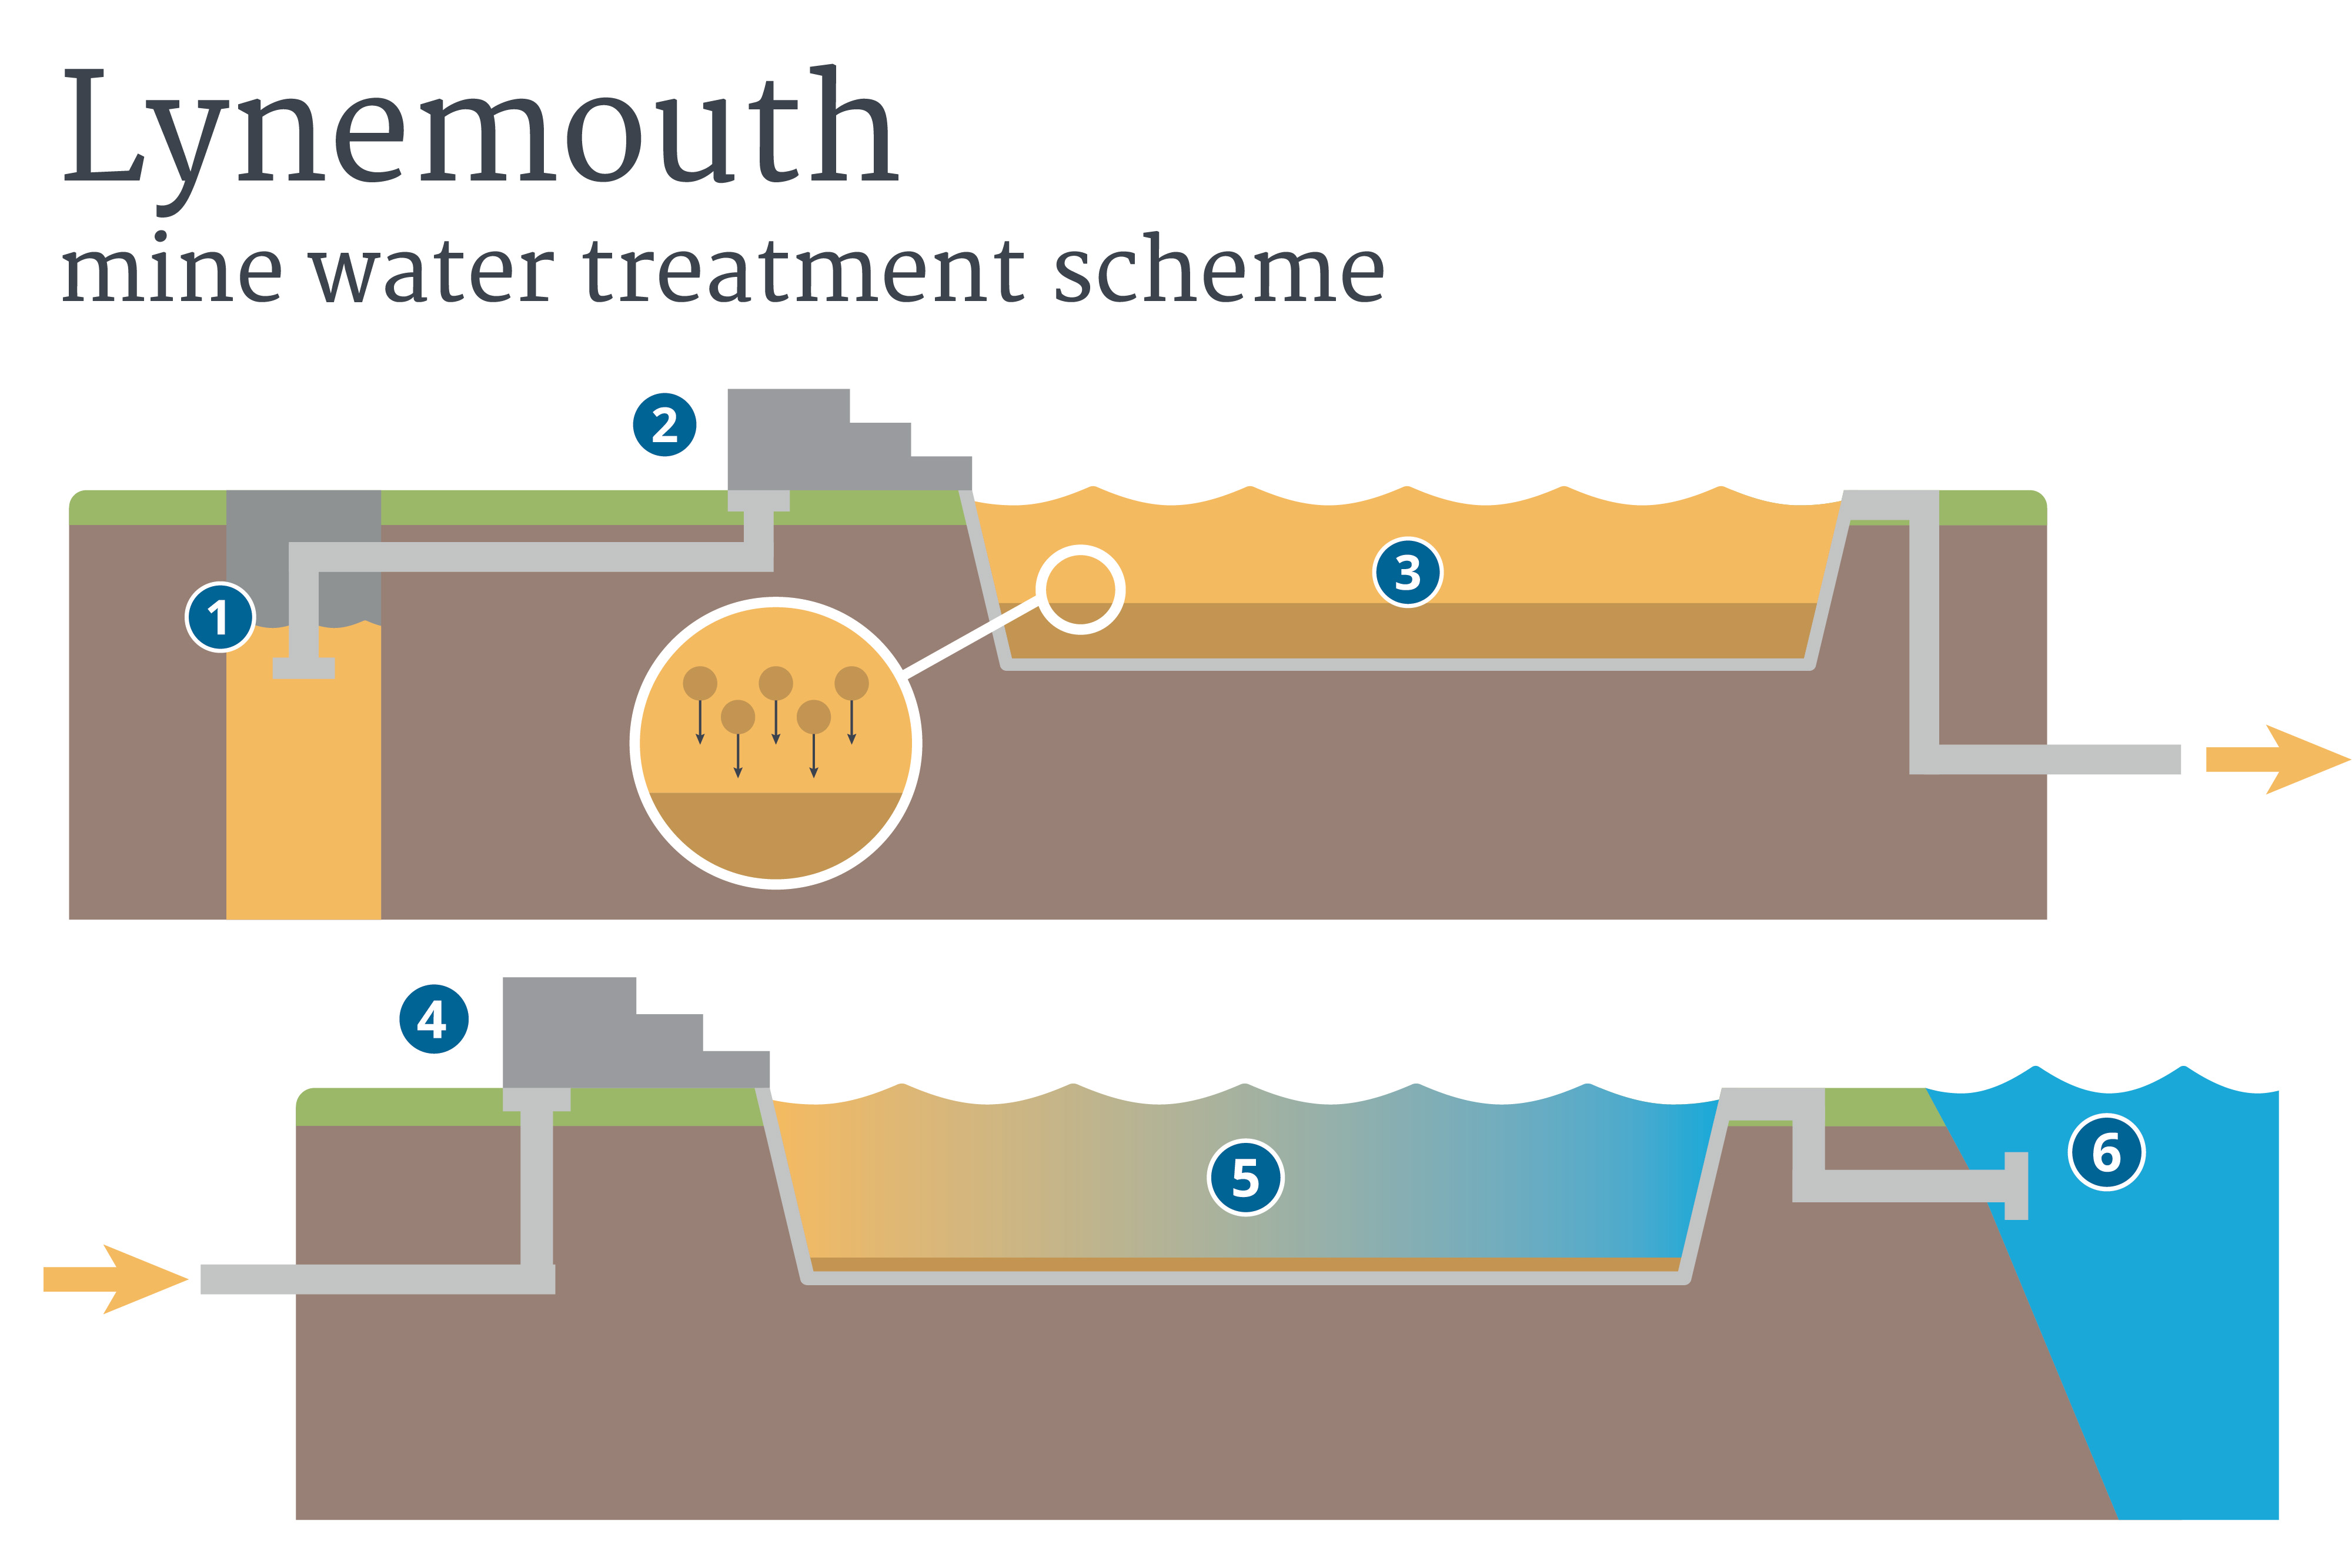 Graphic showing how the Lynemouth mine water treatment scheme works.